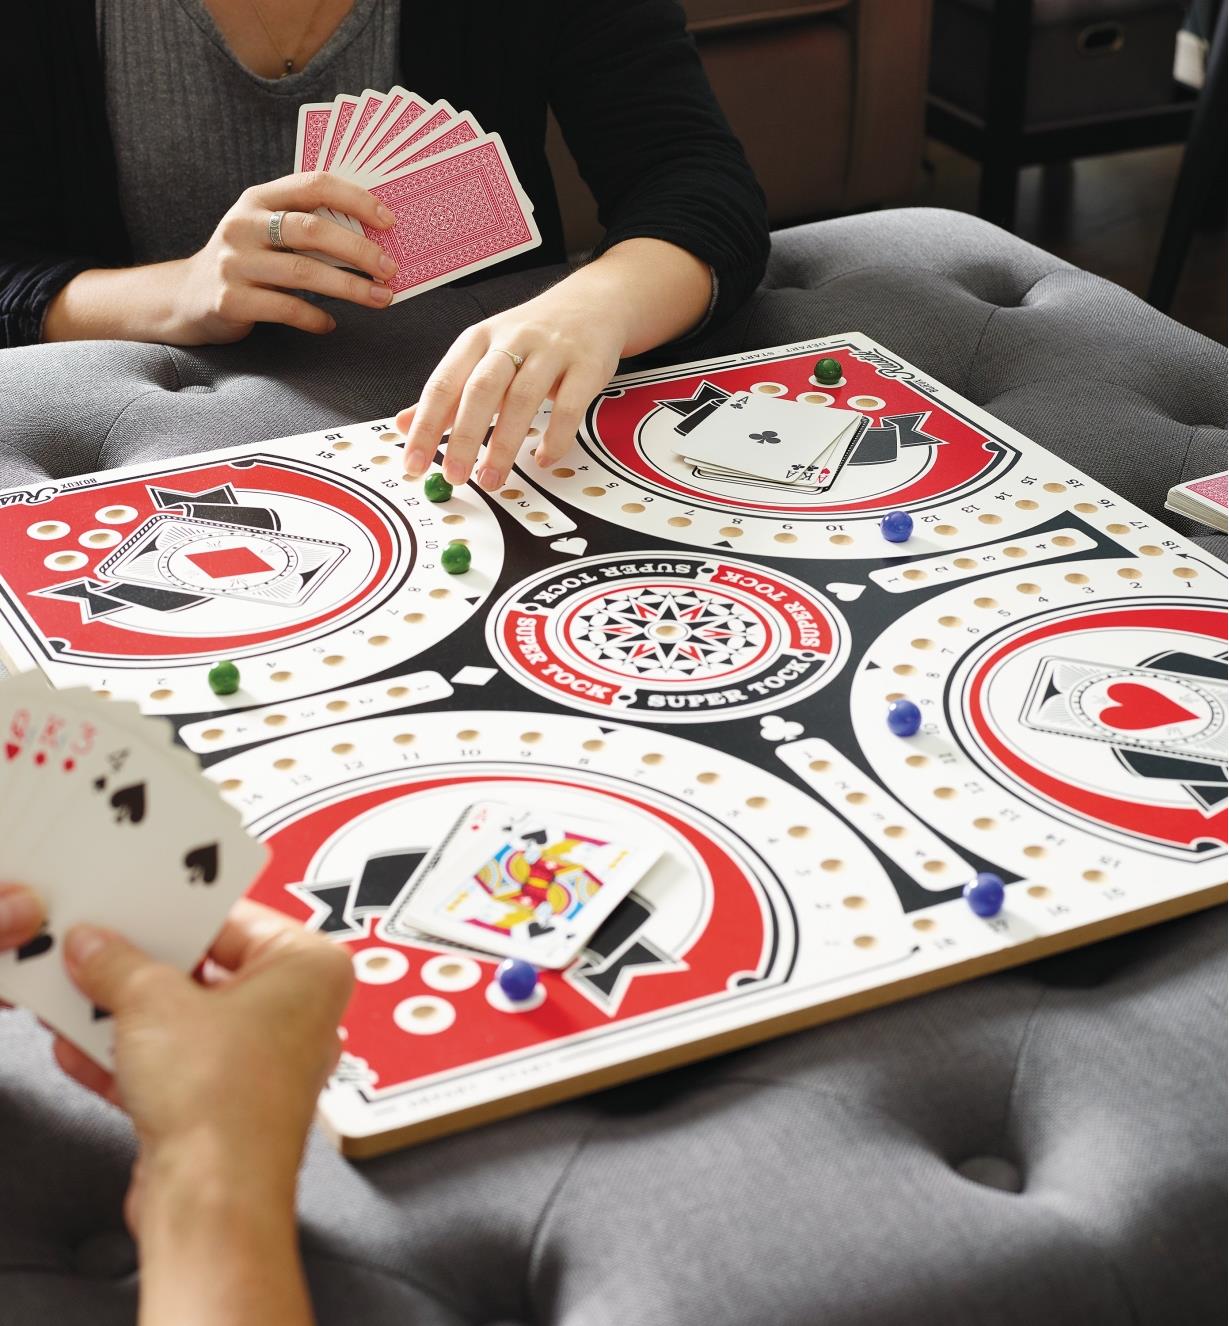 Tock board game being played